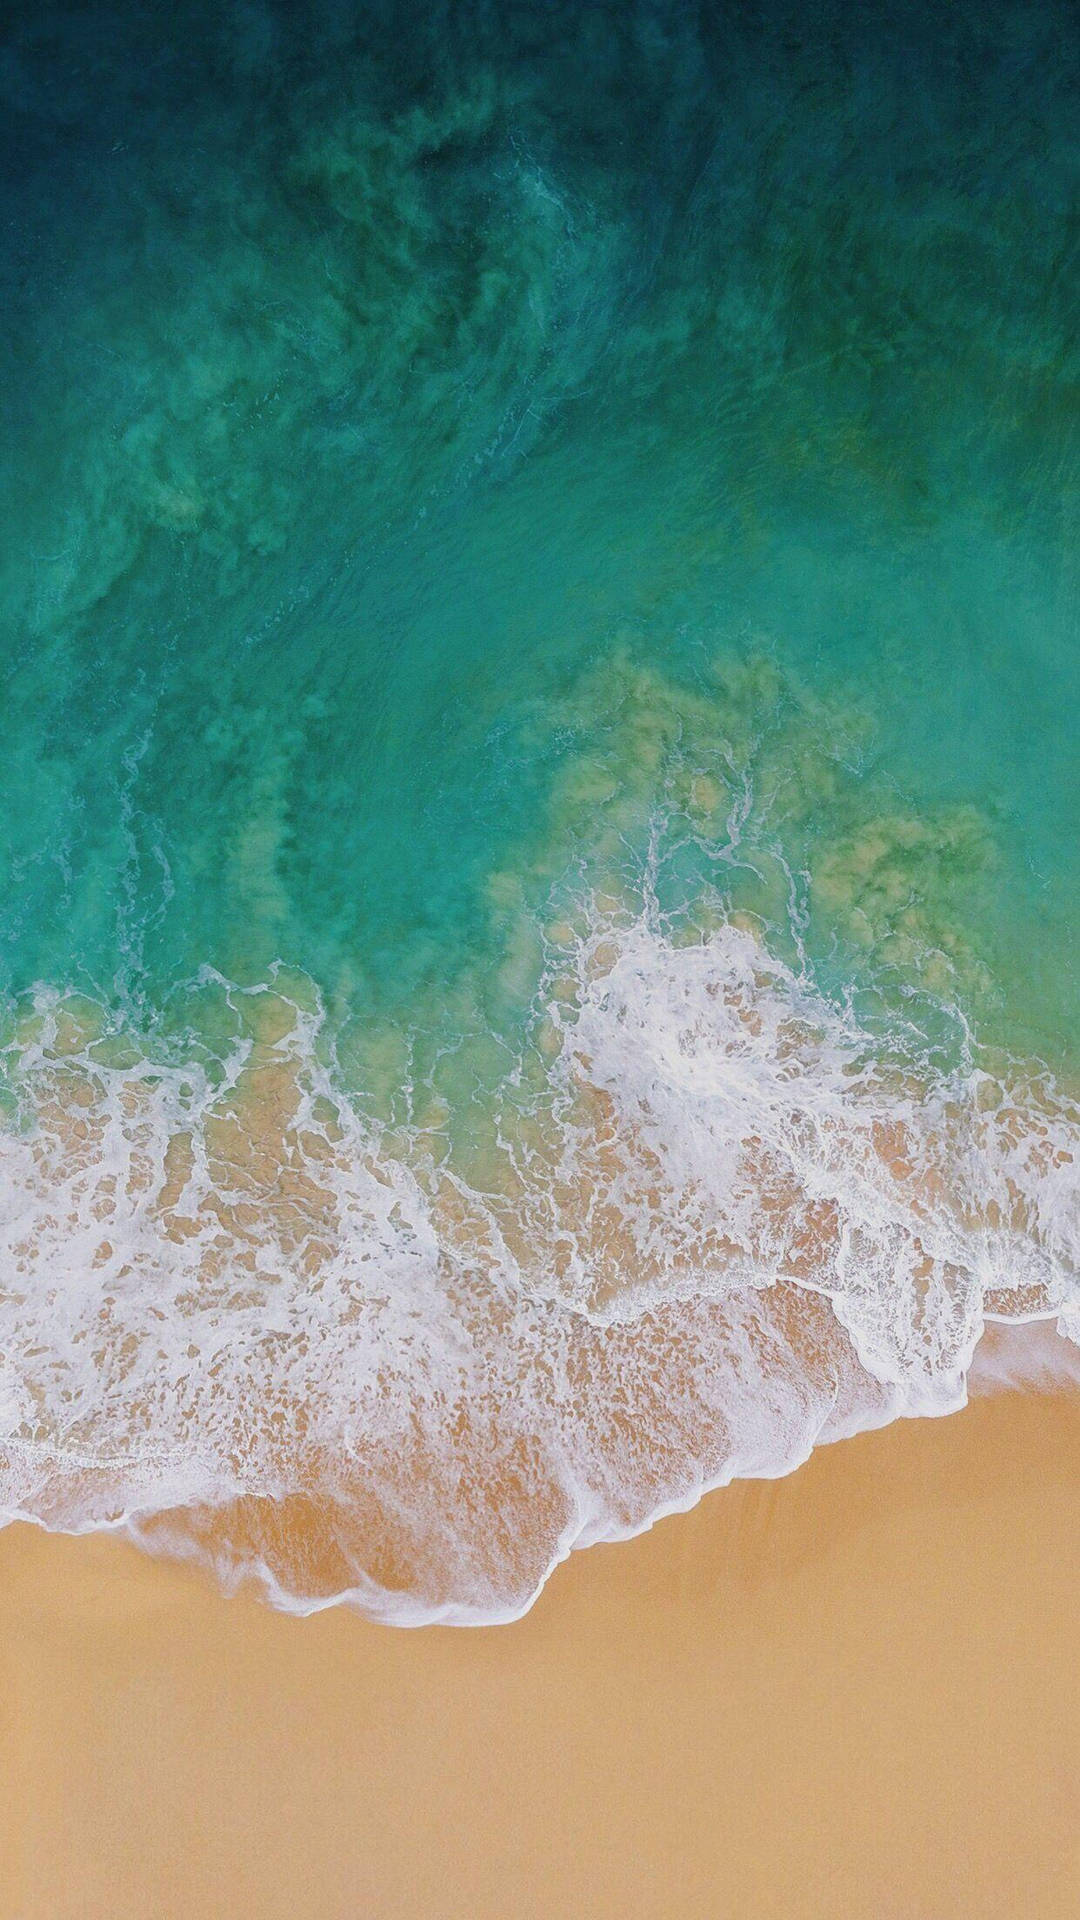 Ipad Pro Aerial View Of Waves On Shore